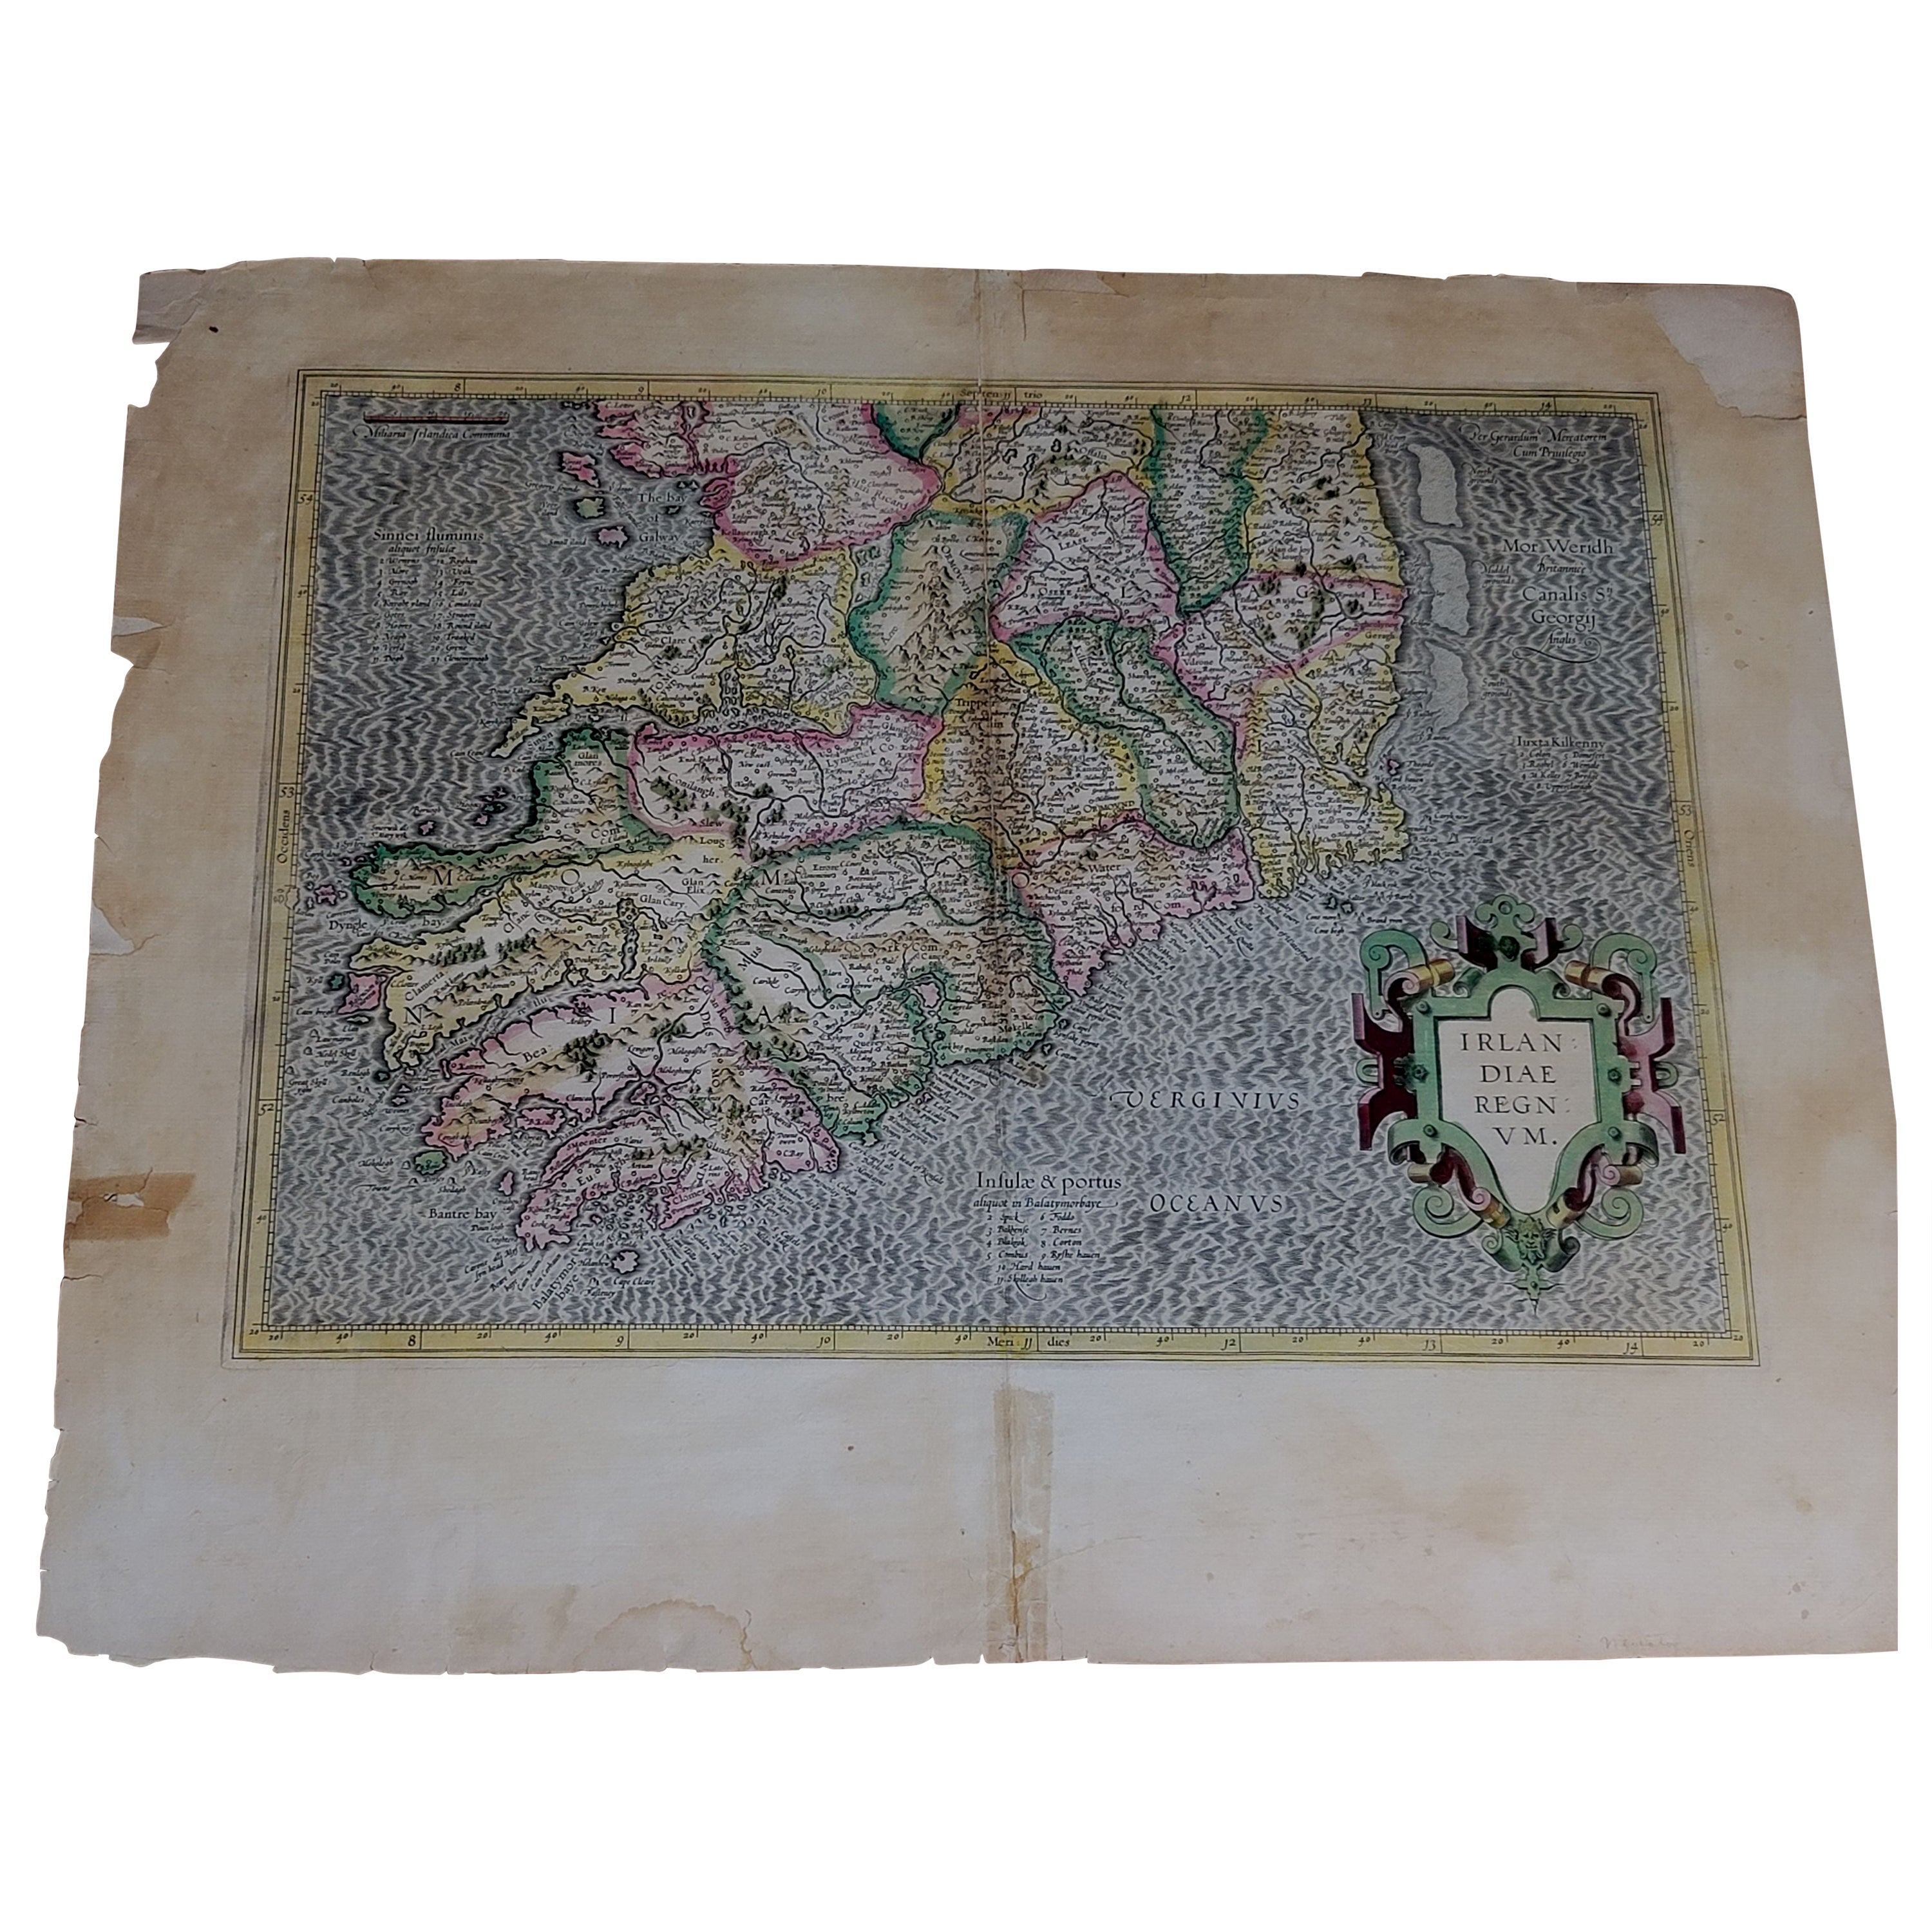 1585 Mercator Map of Ireland, Entitled "Irlandiae Regnvm, " Hand Colored Ric0006 For Sale